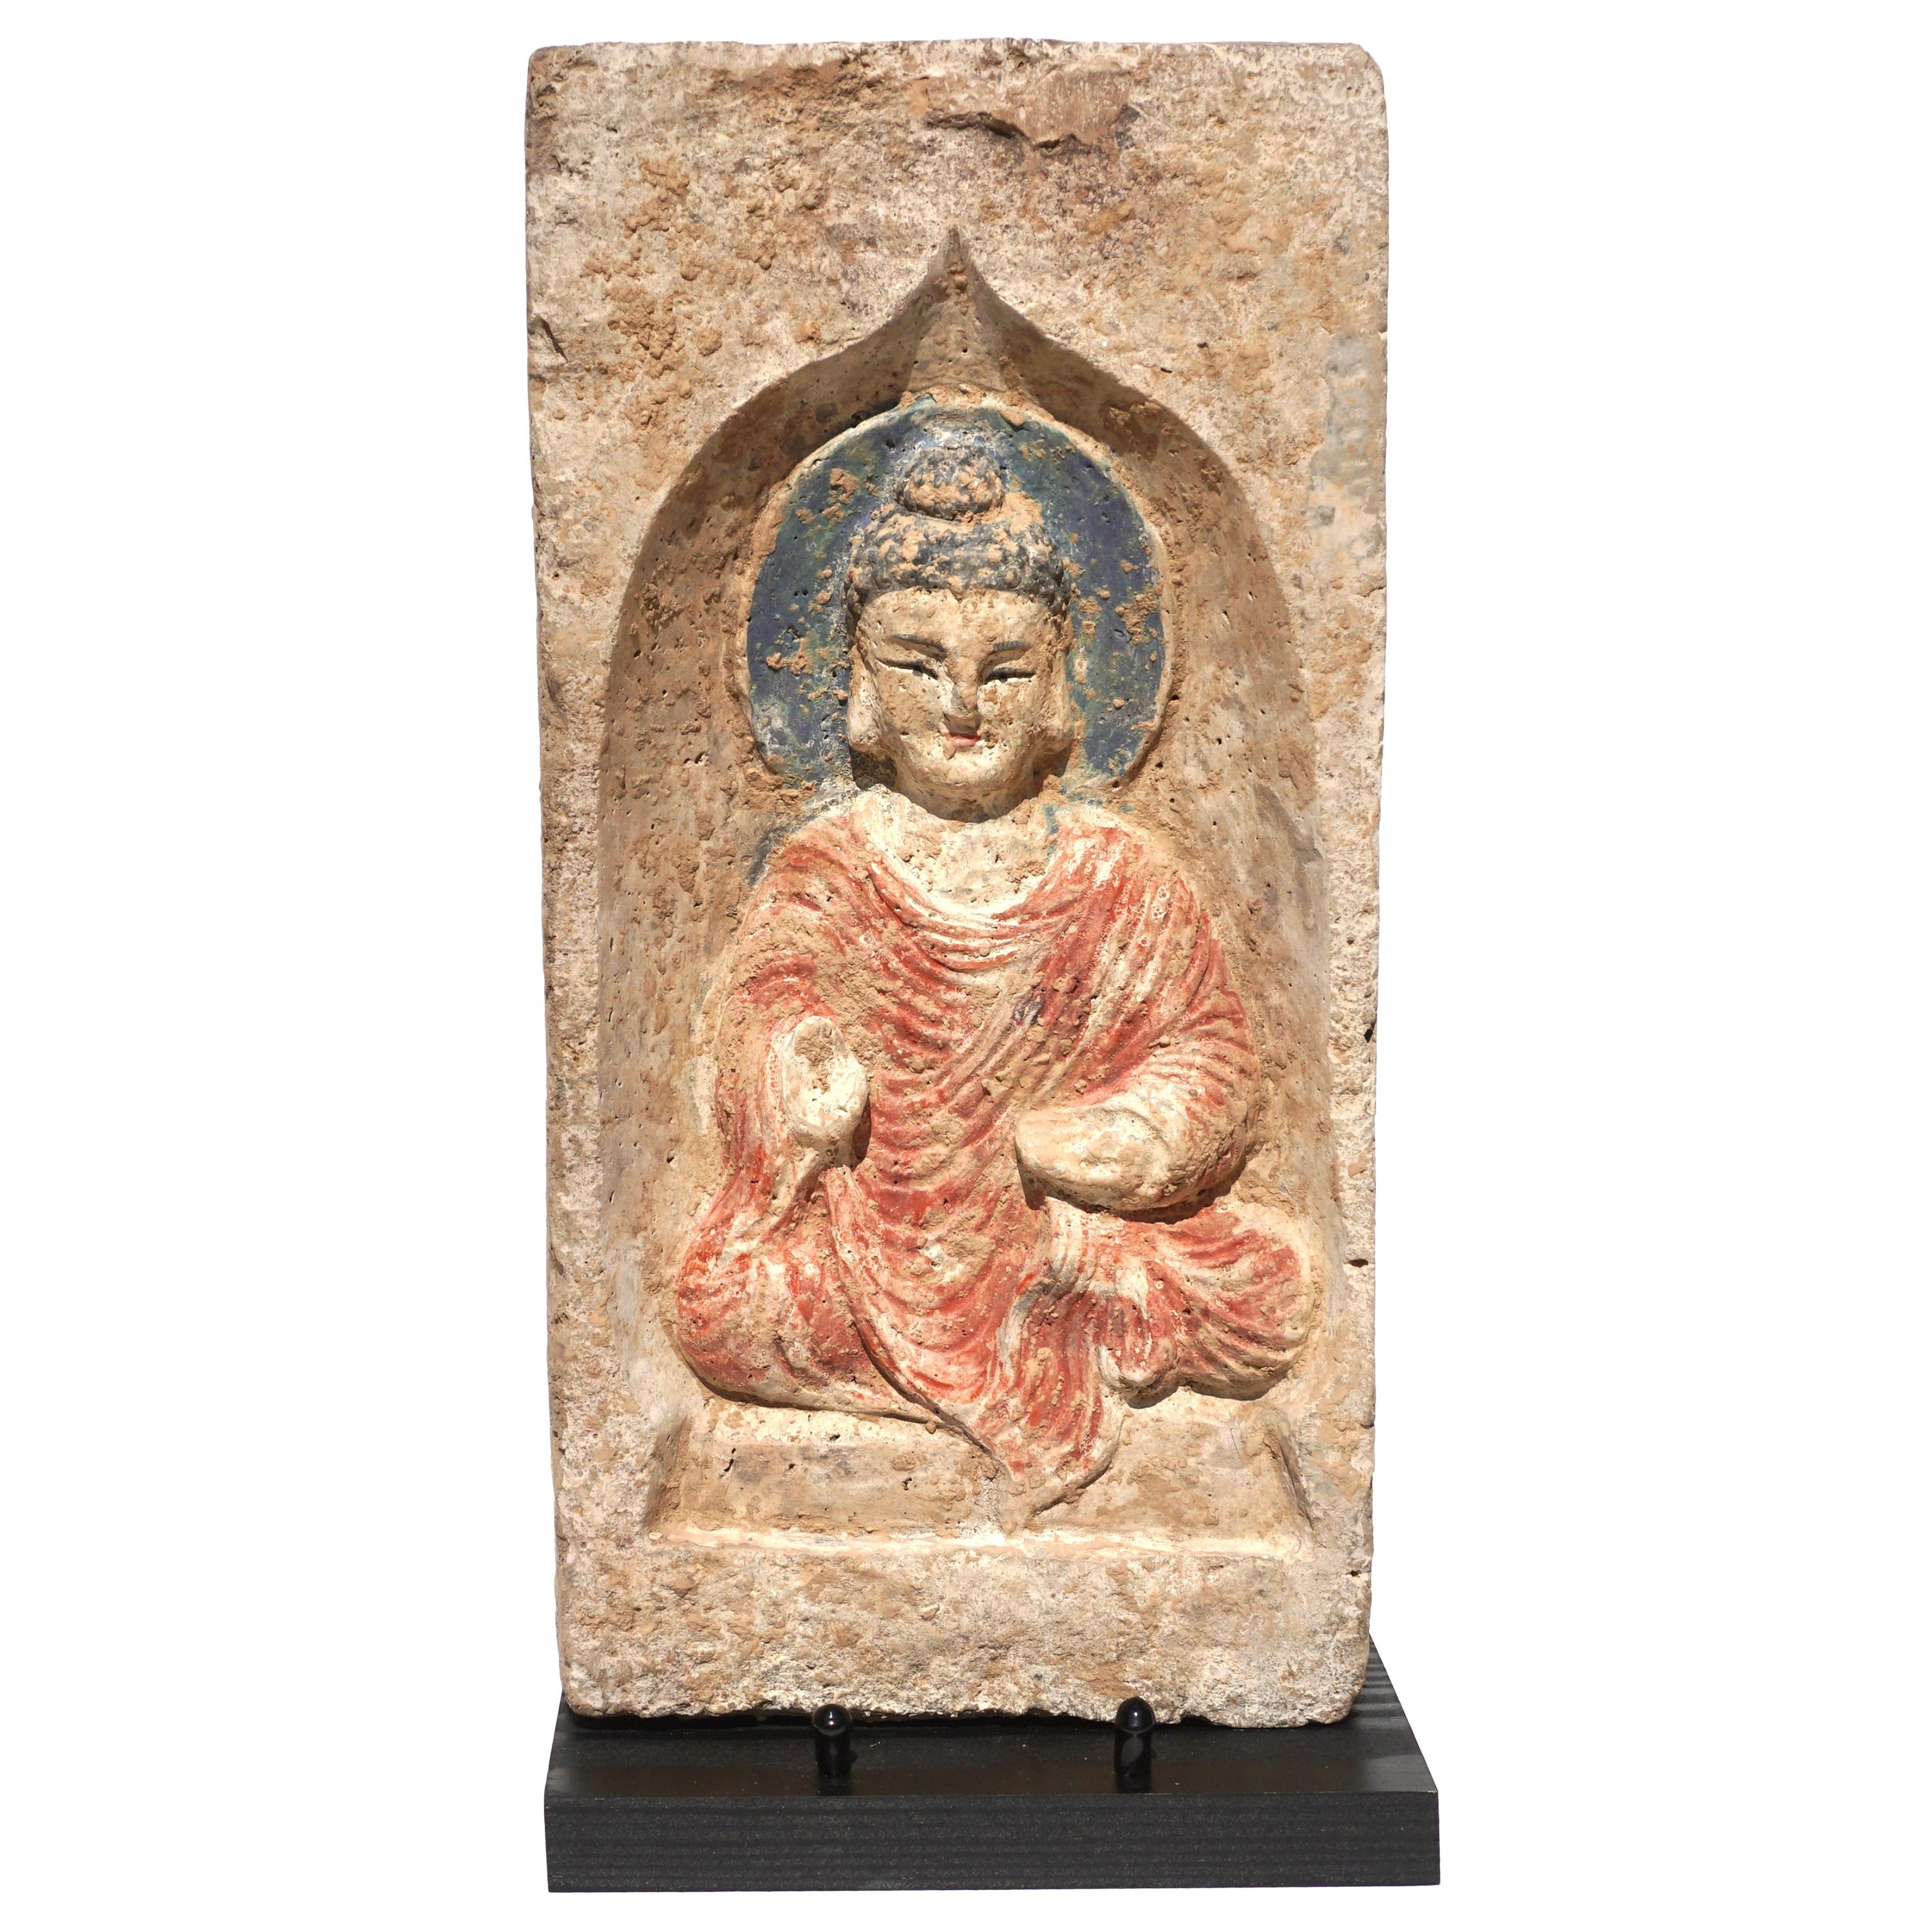 Northern Wei Dynasty Terracotta Sculpture of Buddha 386-534 AD